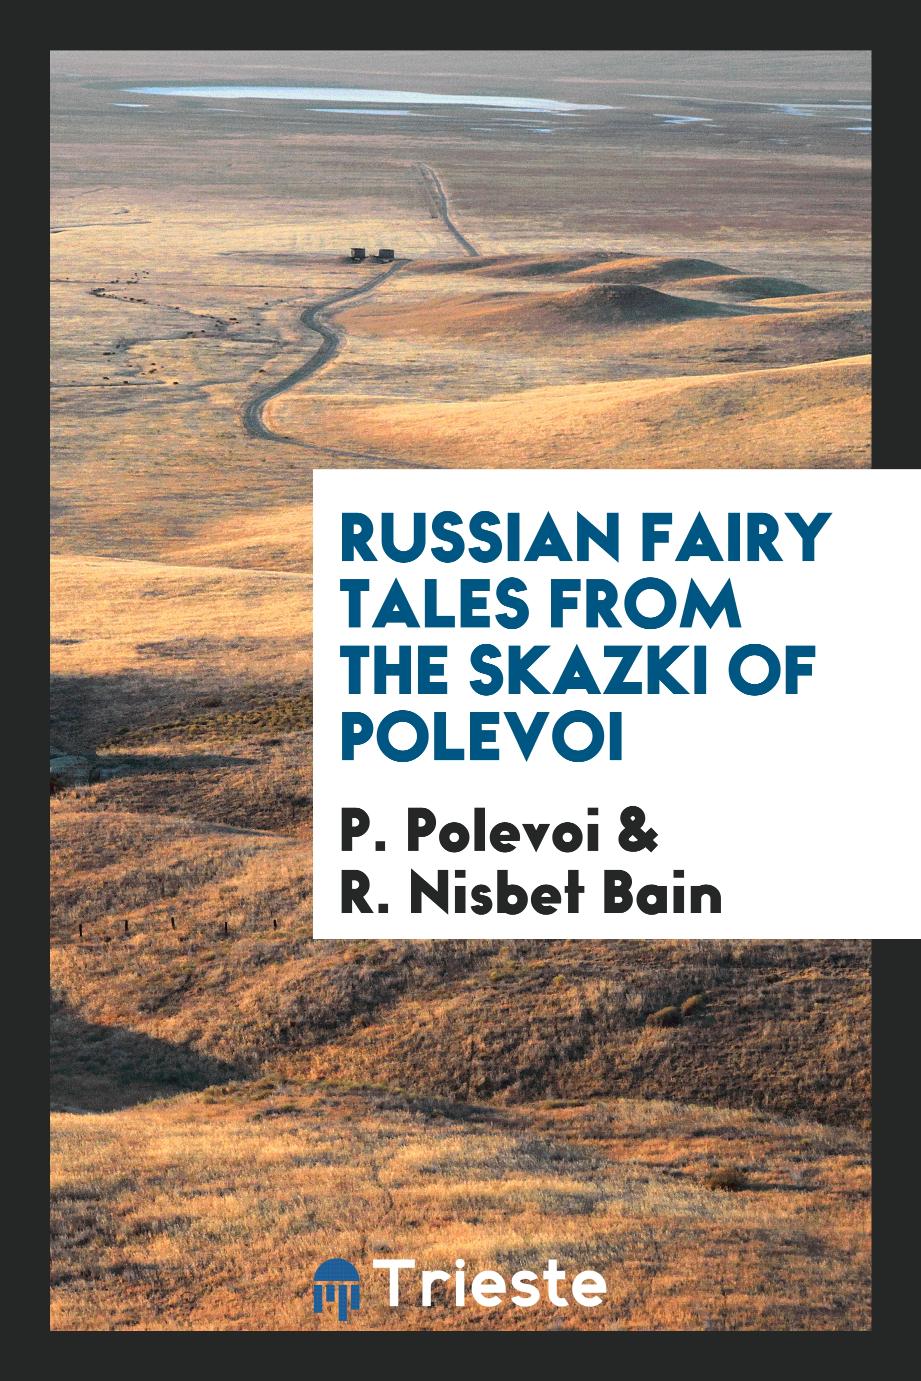 Russian fairy tales from the Skazki of Polevoi